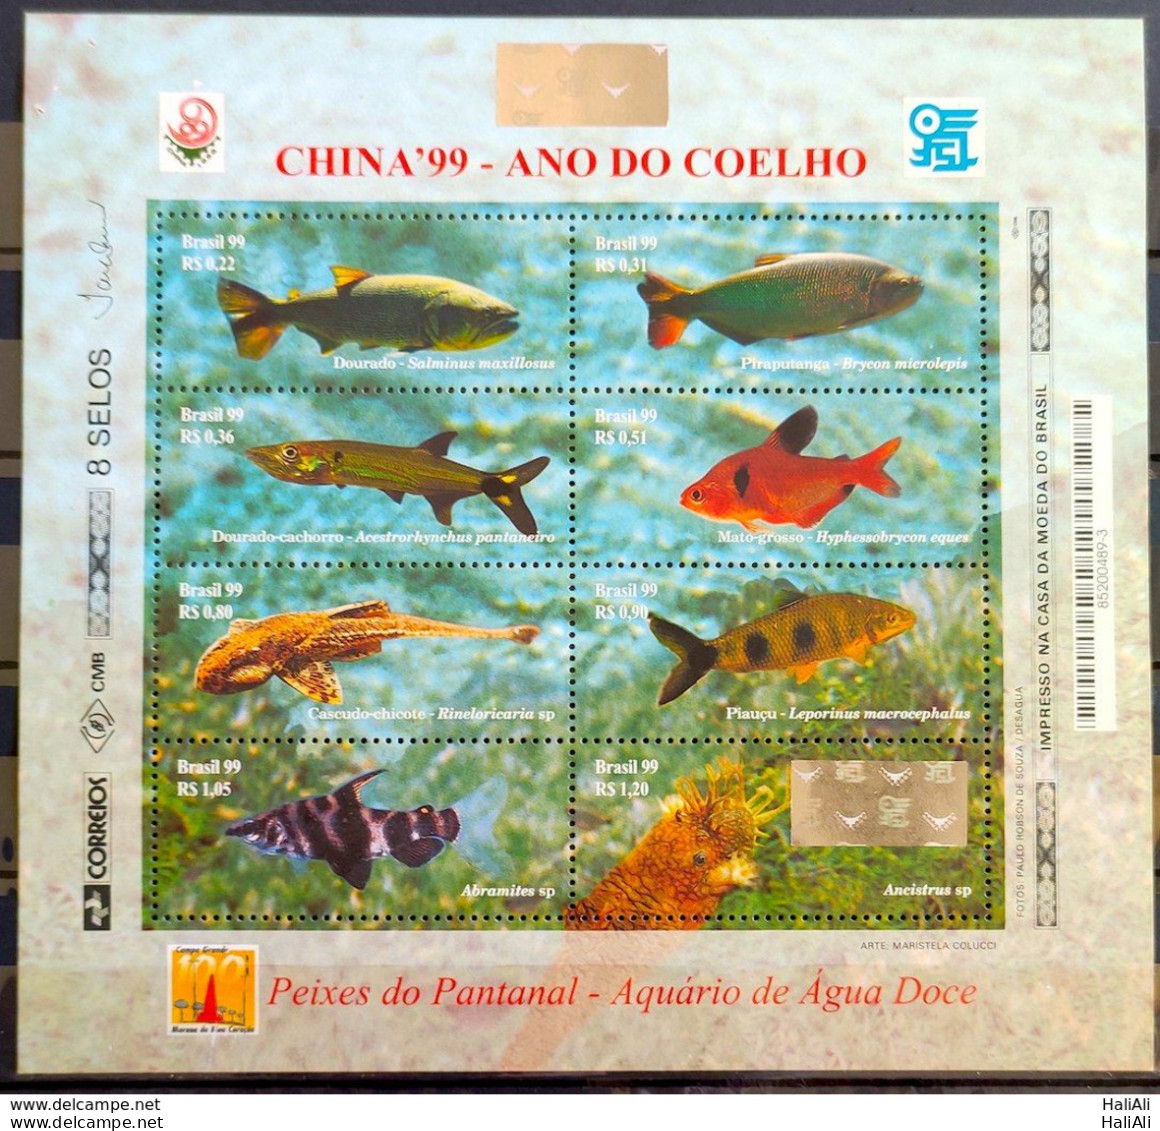 B 113 Brazil Stamp China Block Year Of The Rabbit Pisces Do Pantanal 1999 Clip Holes 2, Upper Left - Neufs